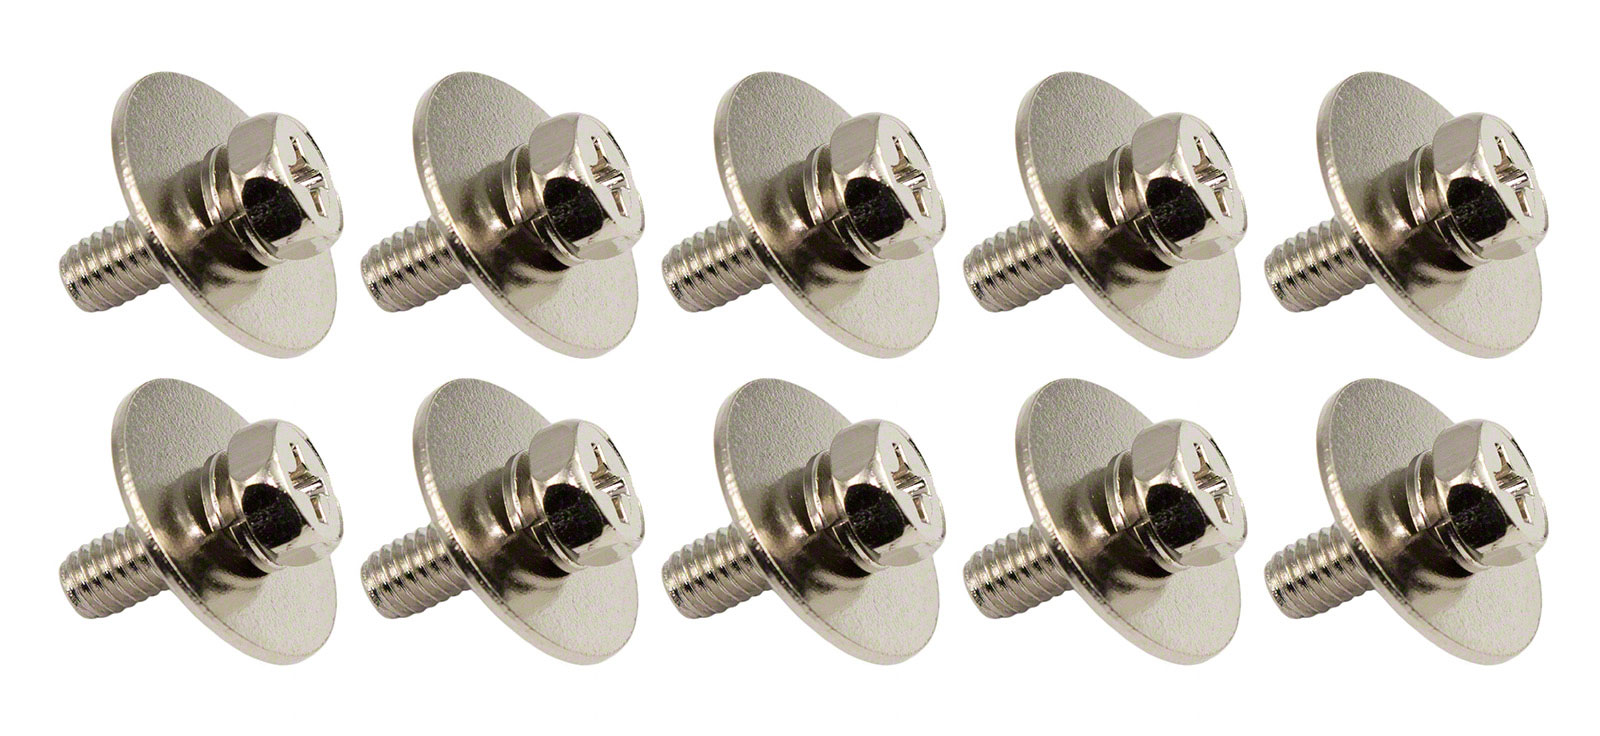 SPAREDRUM WSC4-10 - M4 10MM - MOUNTING SCREW FOR WOODEN SHELL (X10)